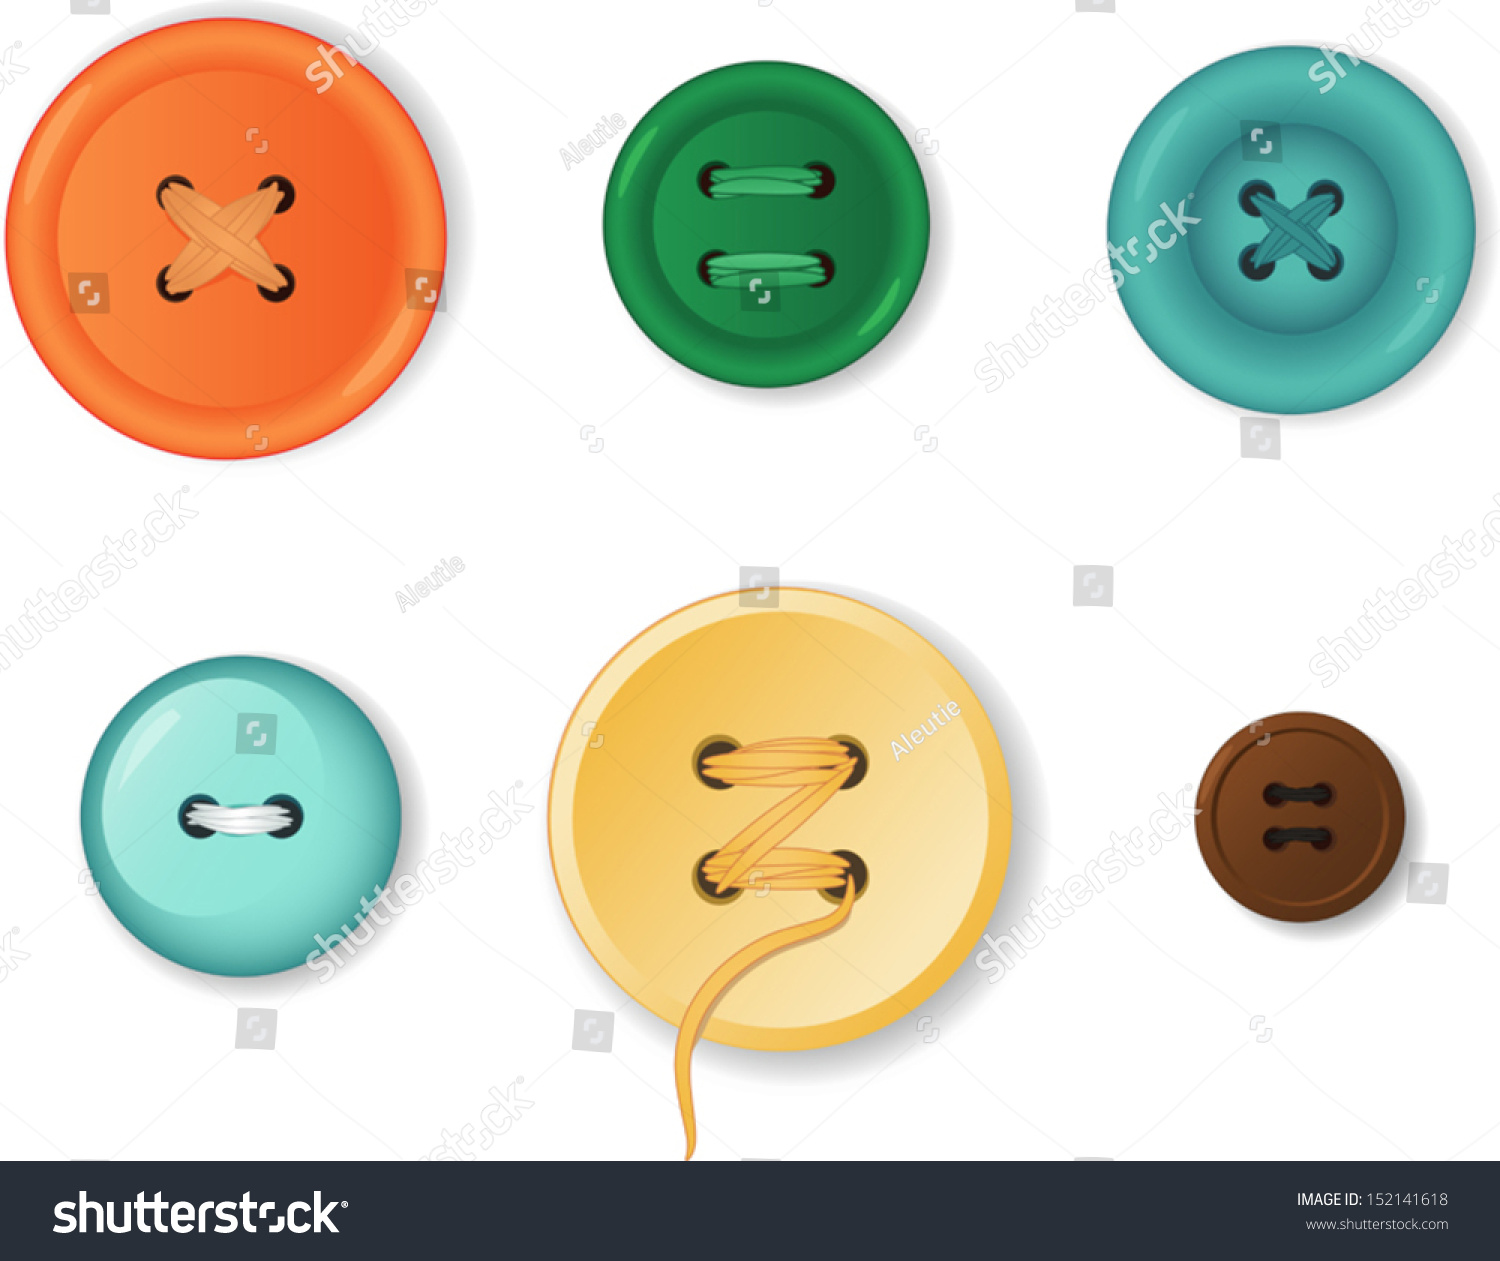 Set Of Realistic Clothing Buttons Stock Vector 152141618 : Shutterstock